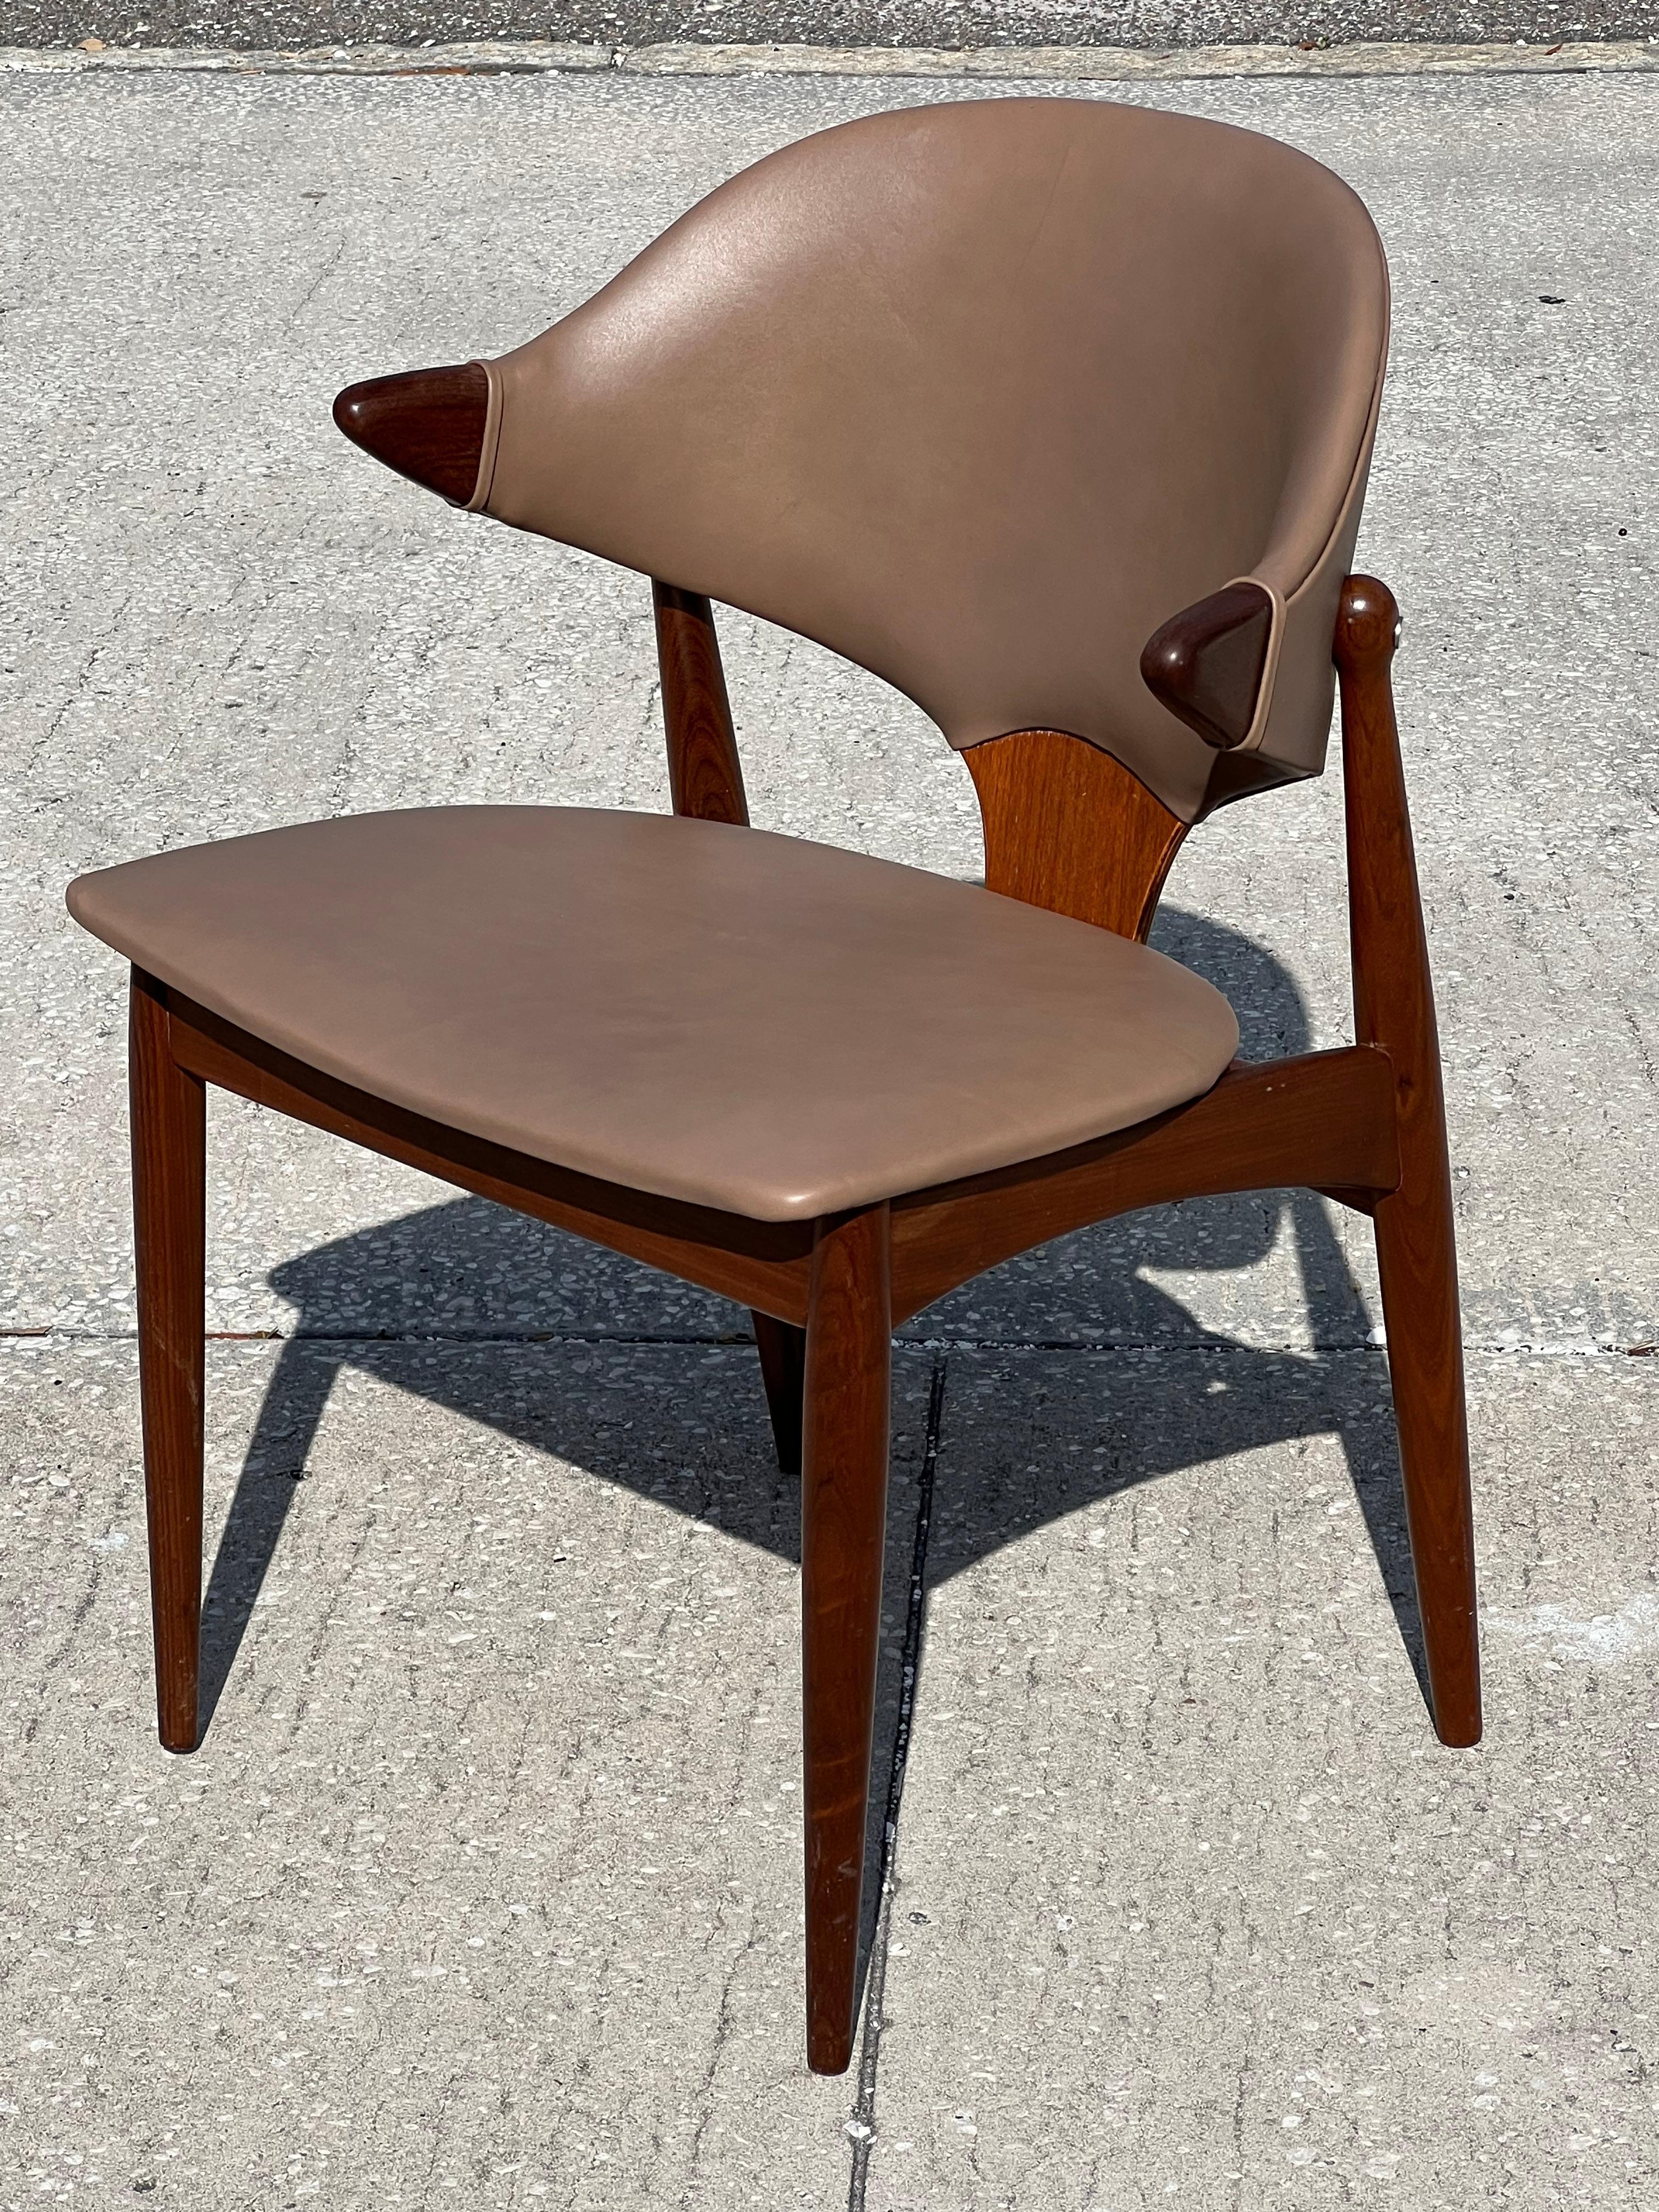 Classic Arne Vodder Leather And Teak Chair For Mahjongg Holland 1964 For Sale 4